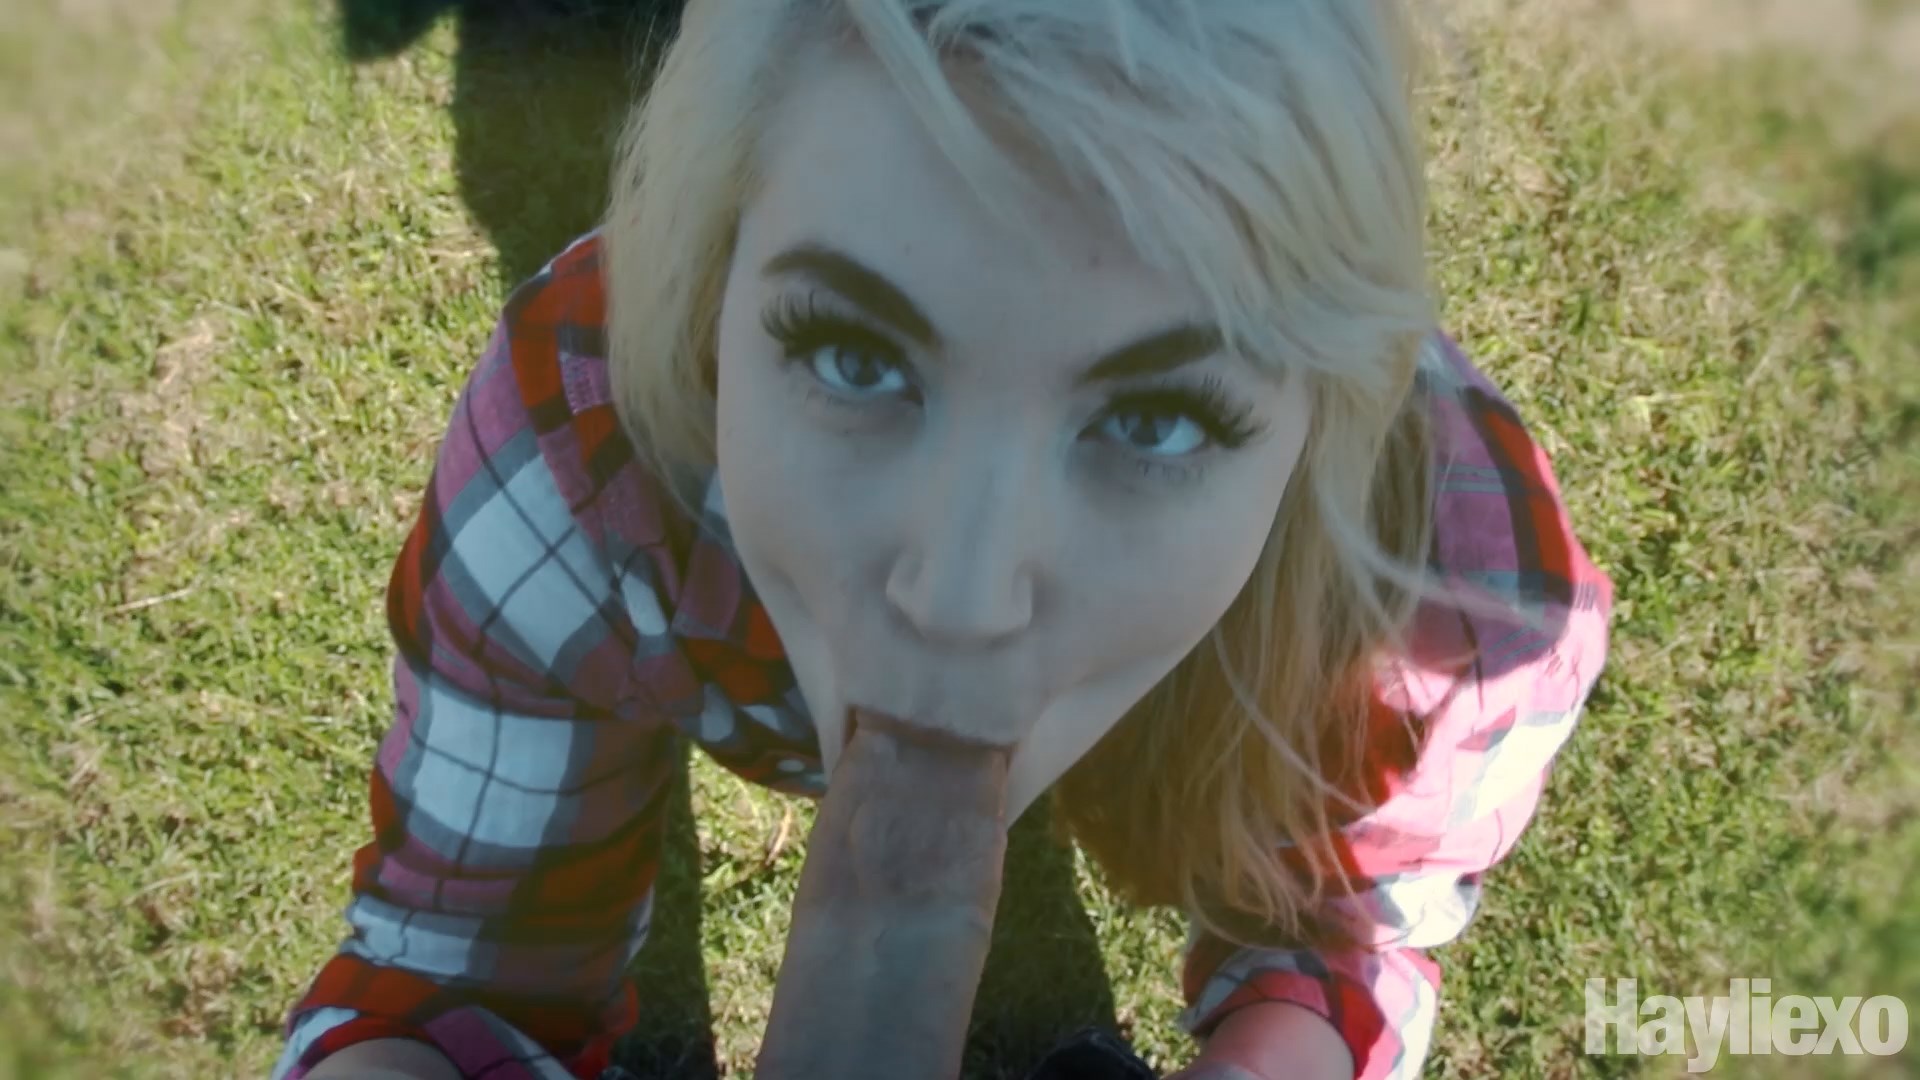 Hayliexo - Public Sex Leads To Accidental Creampie 1080p